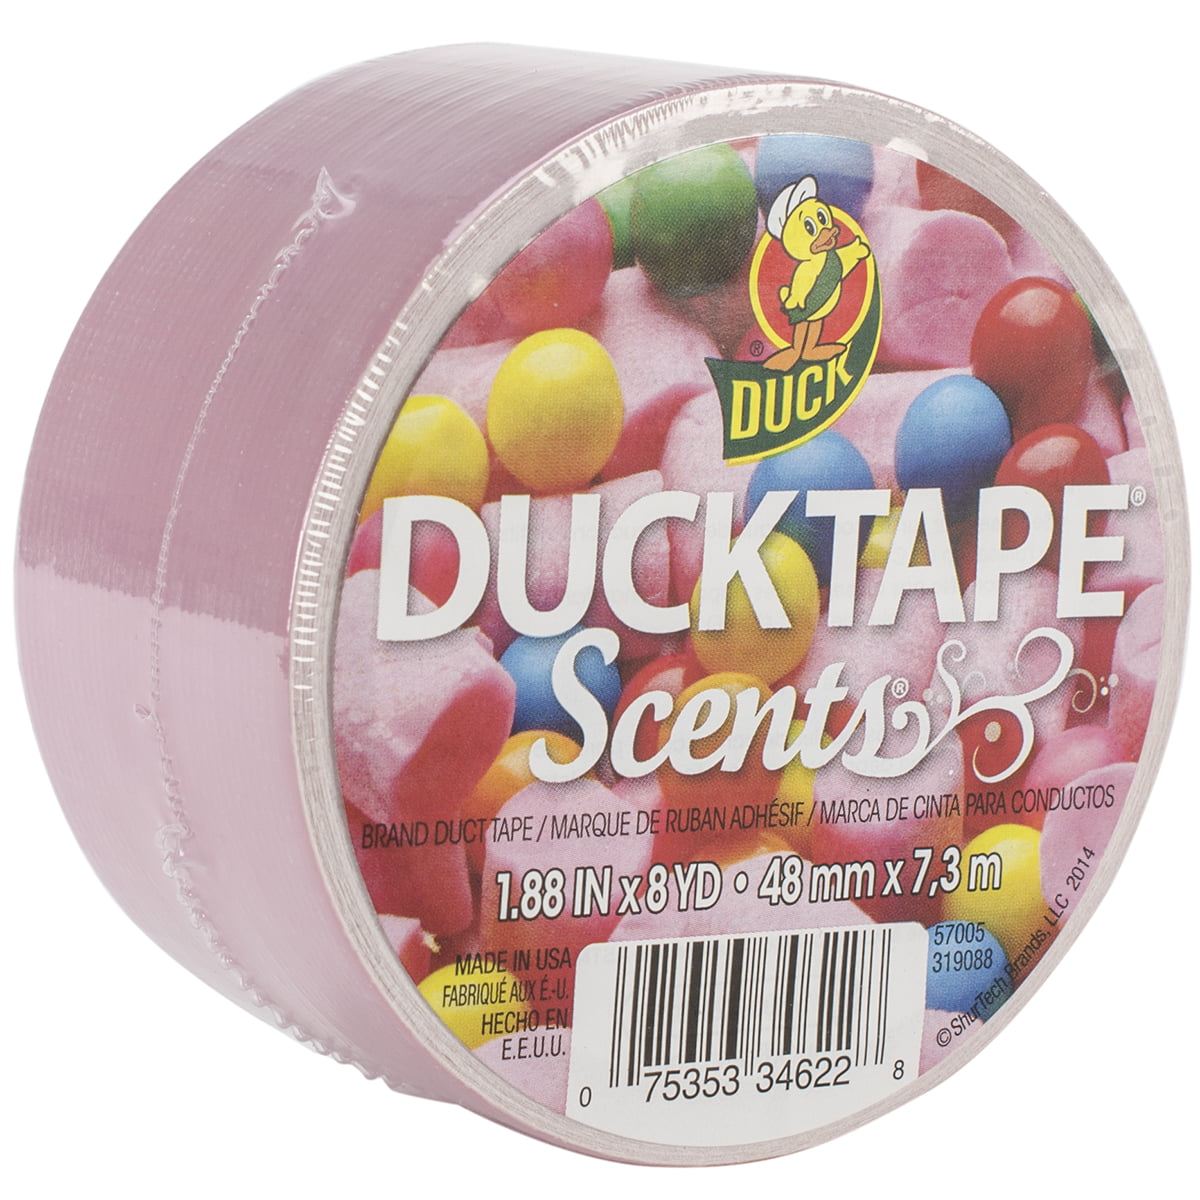 Cupcake 1.88-Inch x 8-Yard LOT OF 2 Duck Brand Scents Duct Tape 